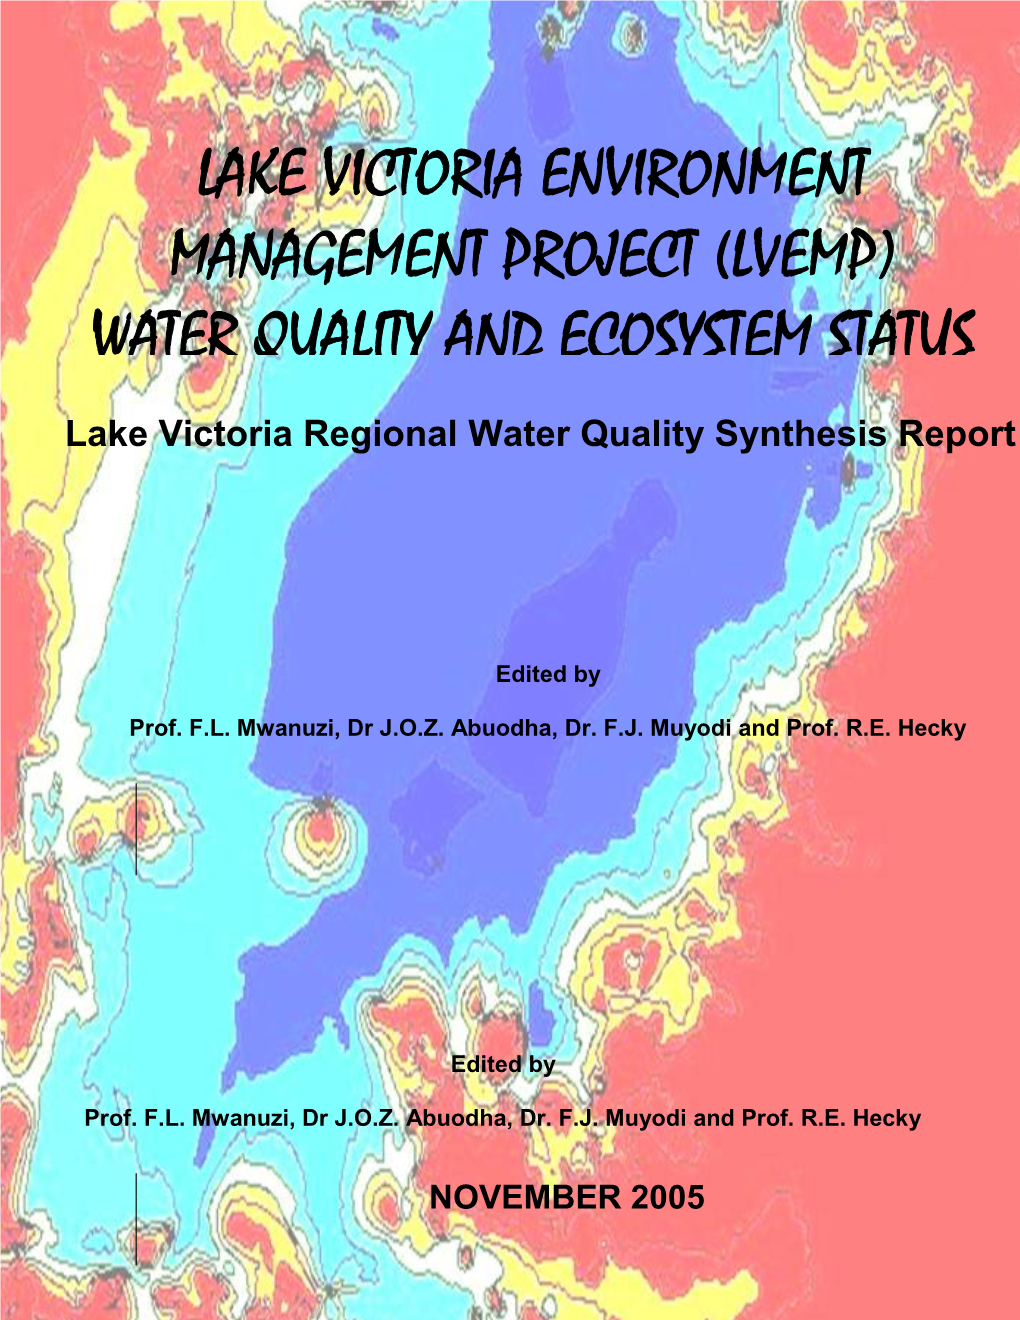 Lake Victoria Environment Management Project (Lvemp) Water Quality and Ecosystem Status